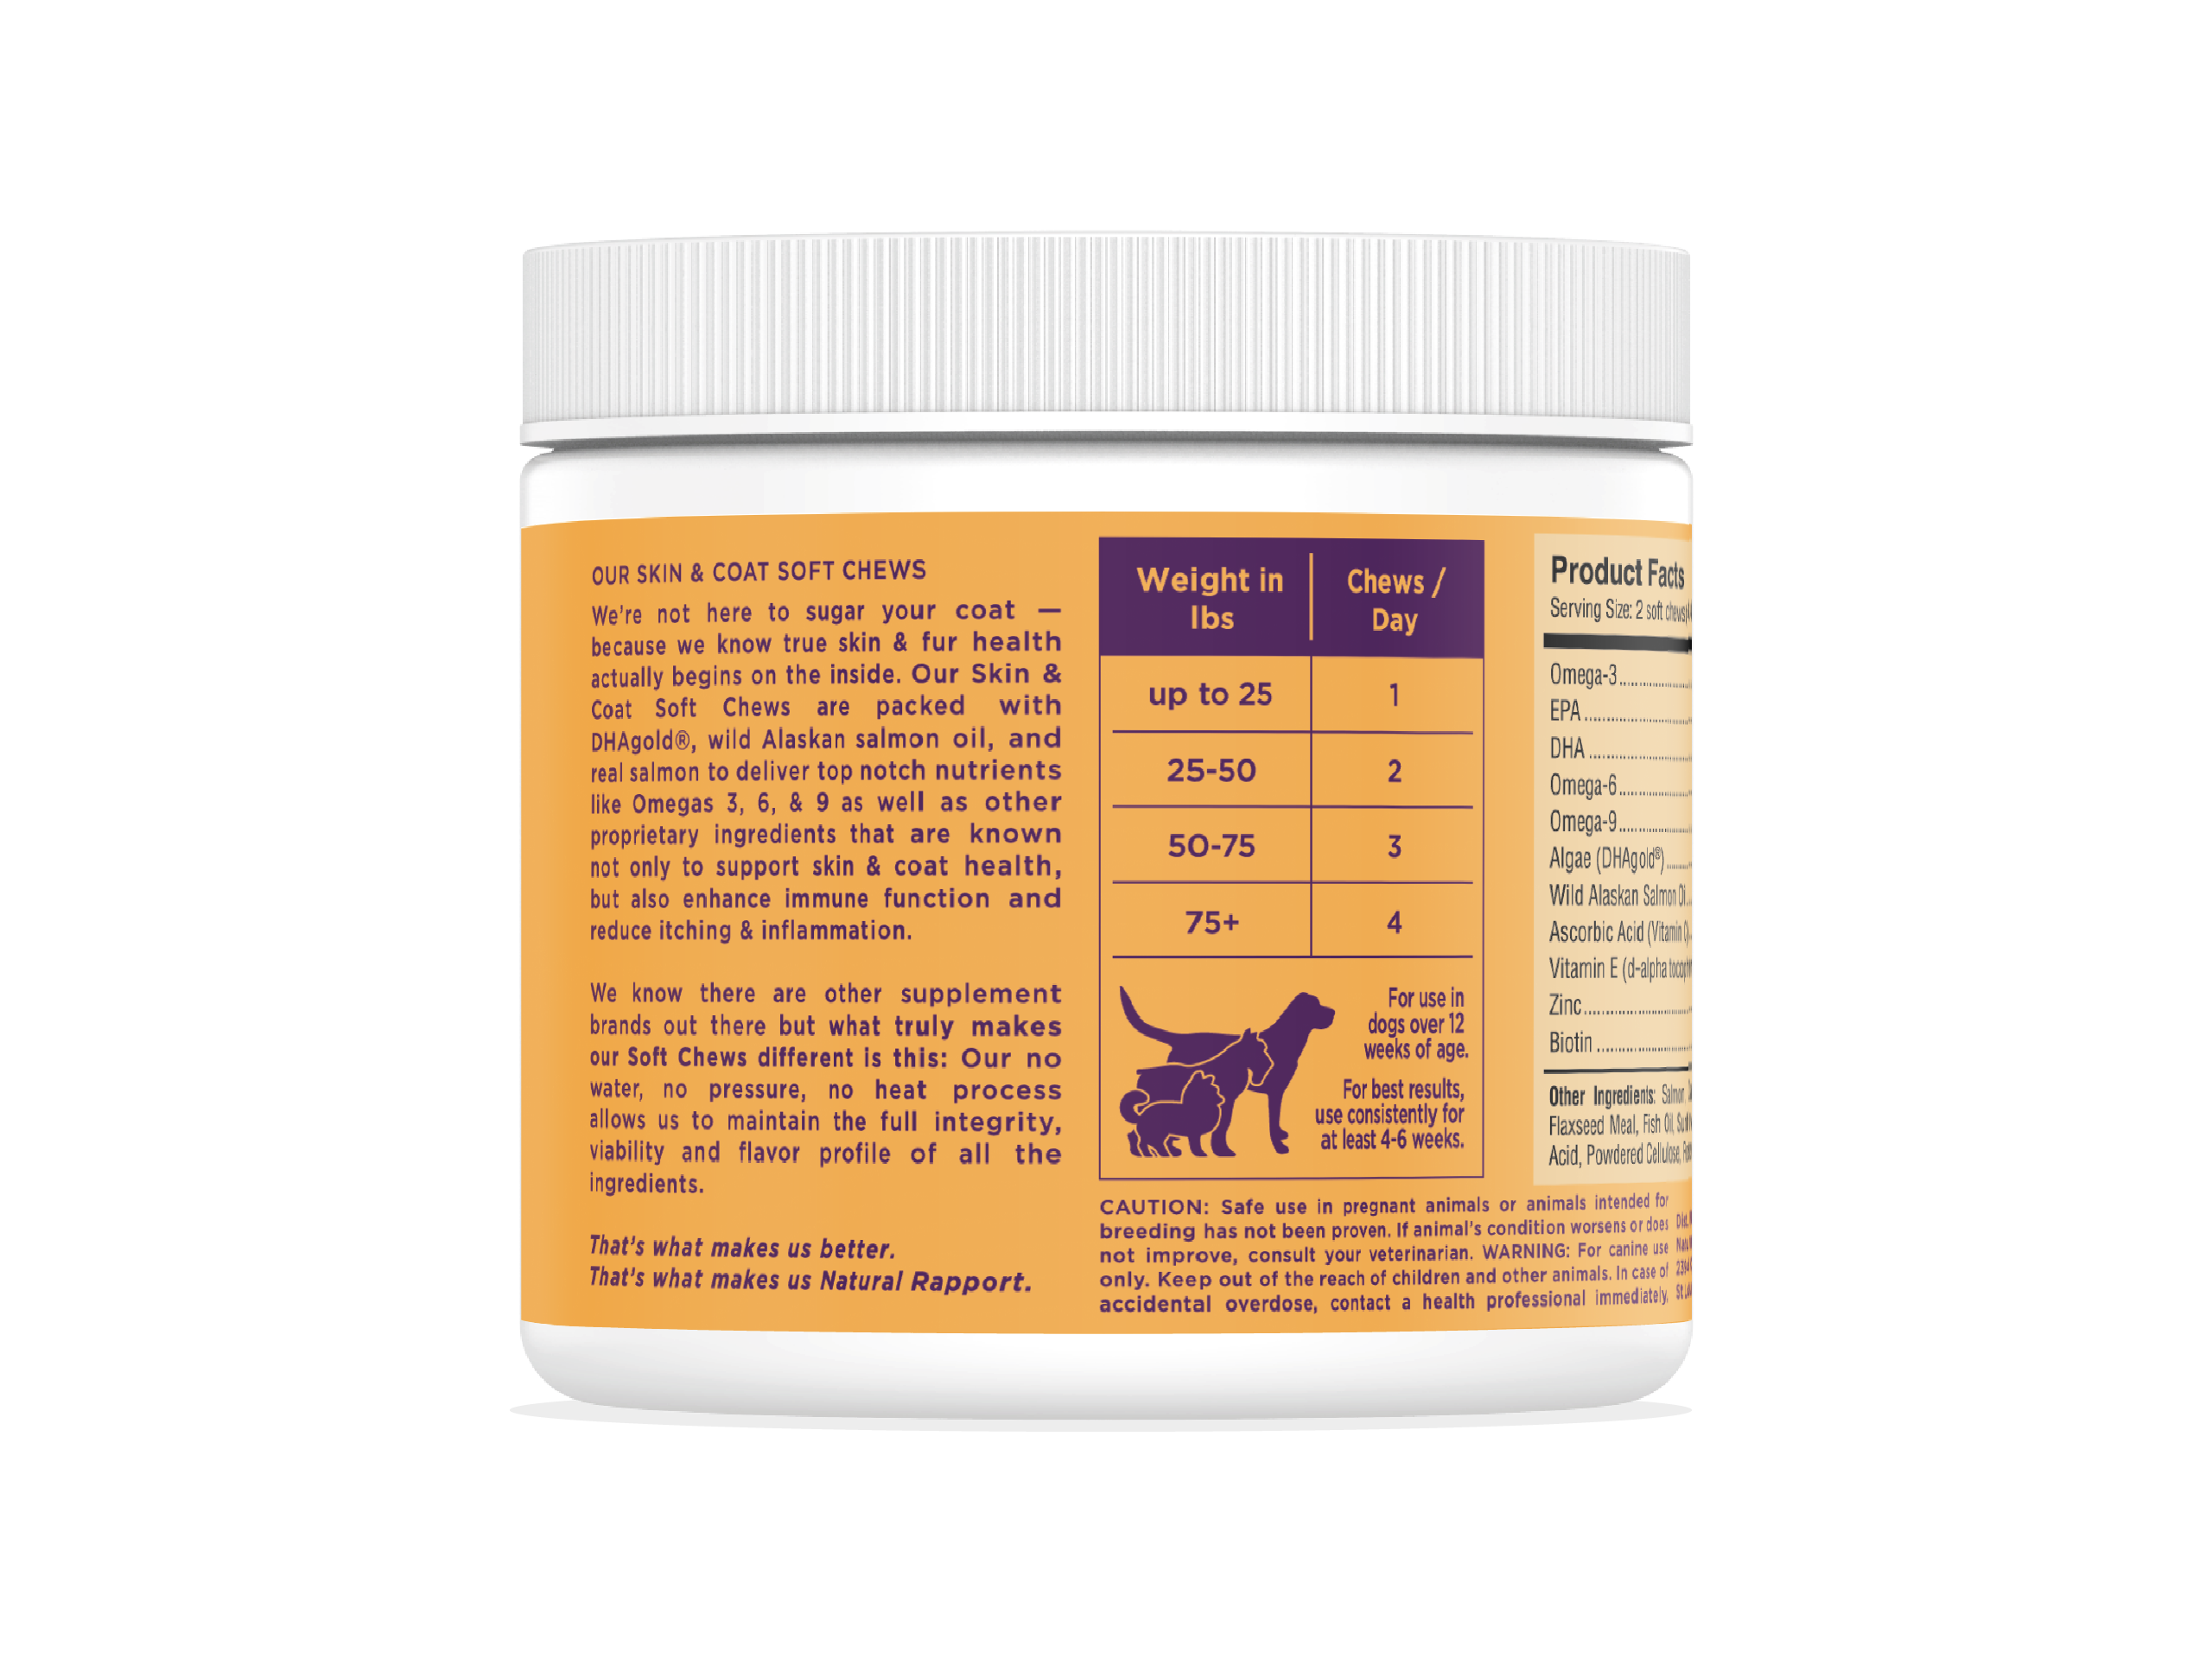 Natural Rapport - The Only Skin & Coat Soft Chews Dogs Need